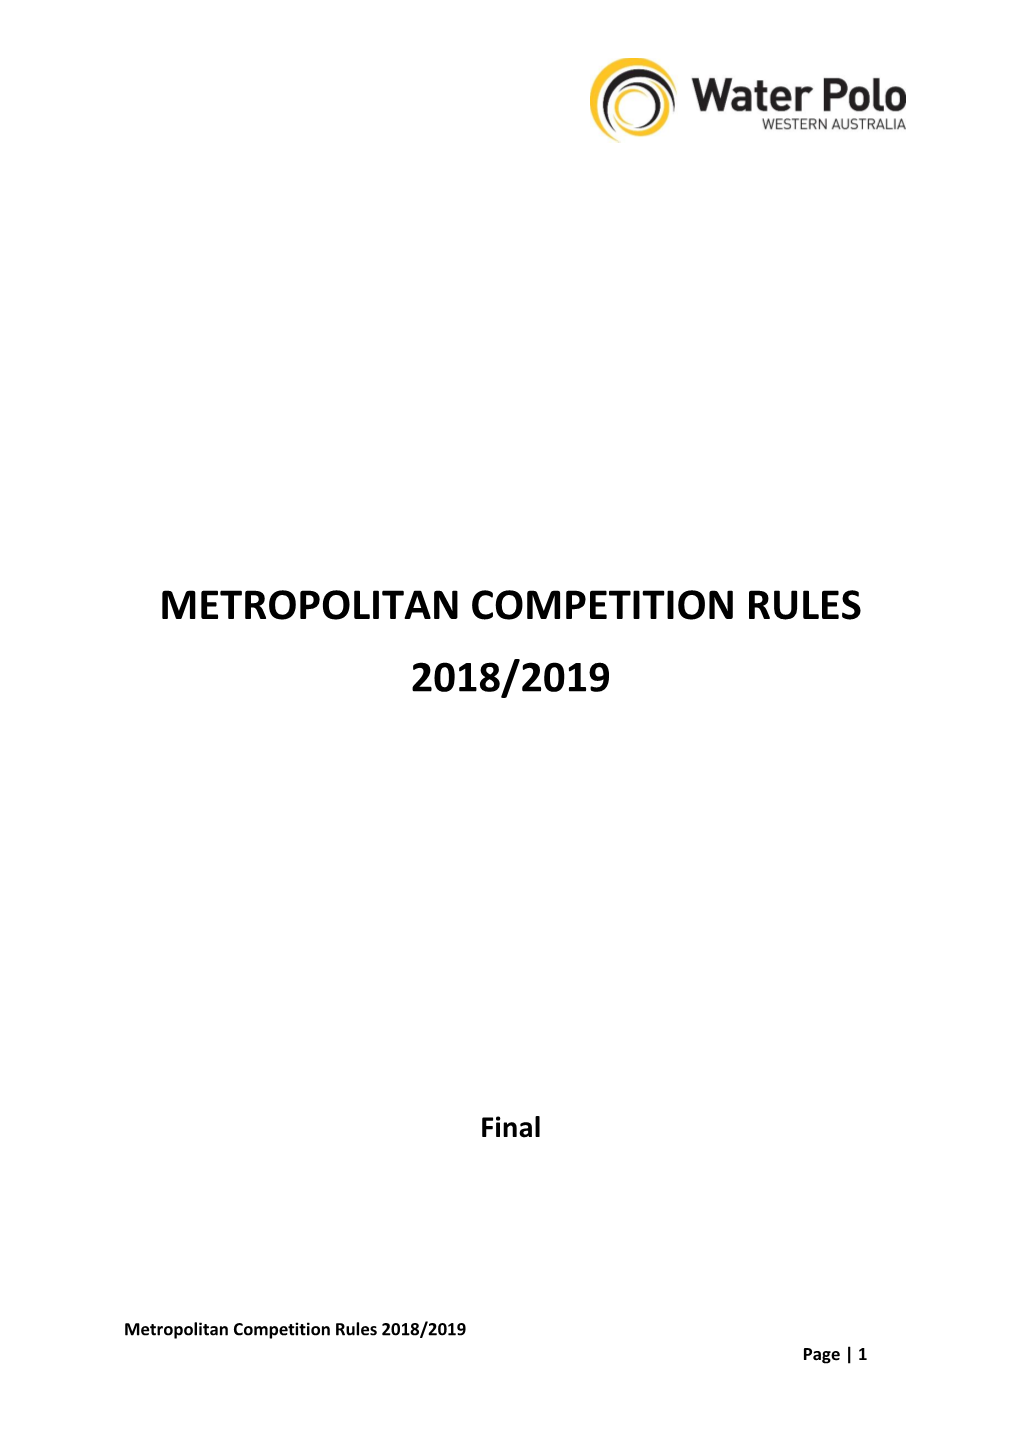 Metropolitan Competition Rules 2018/2019